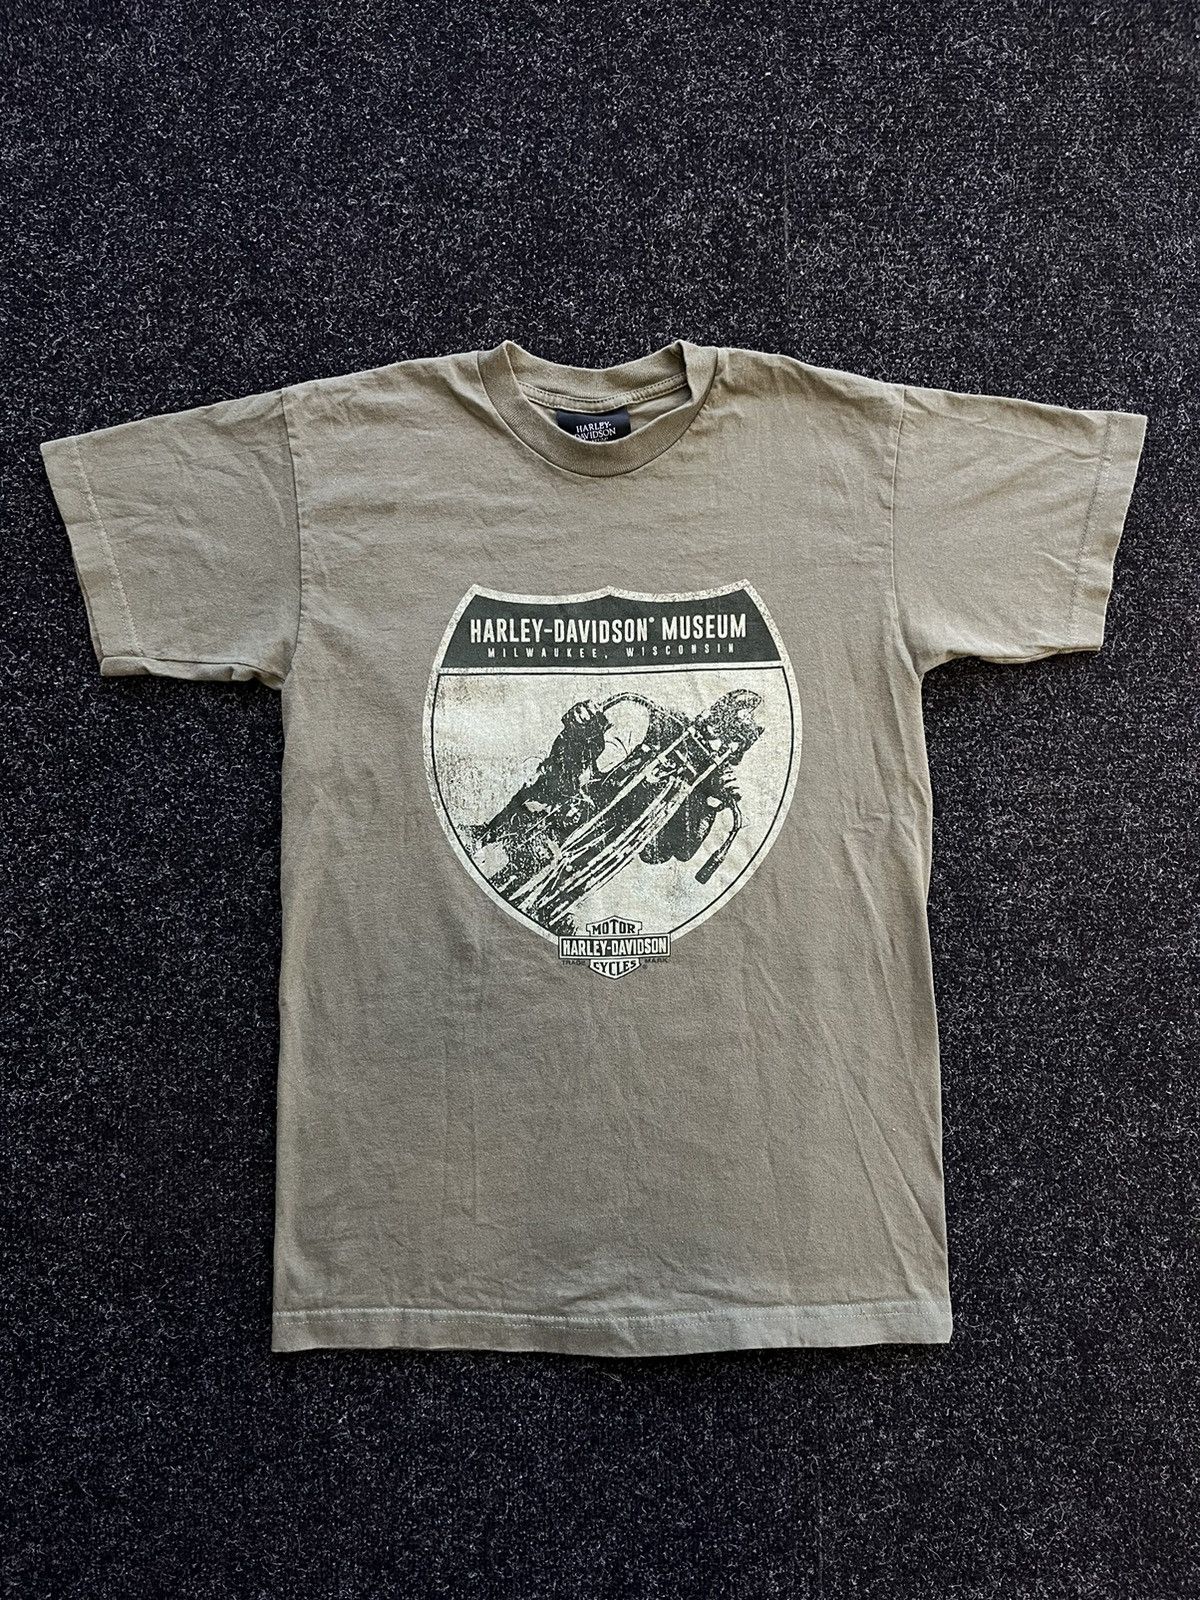 Pre-owned Harley Davidson X Vintage 90's Harley-davidson Museum Wisconsin Made In Usa Tee In Khaki